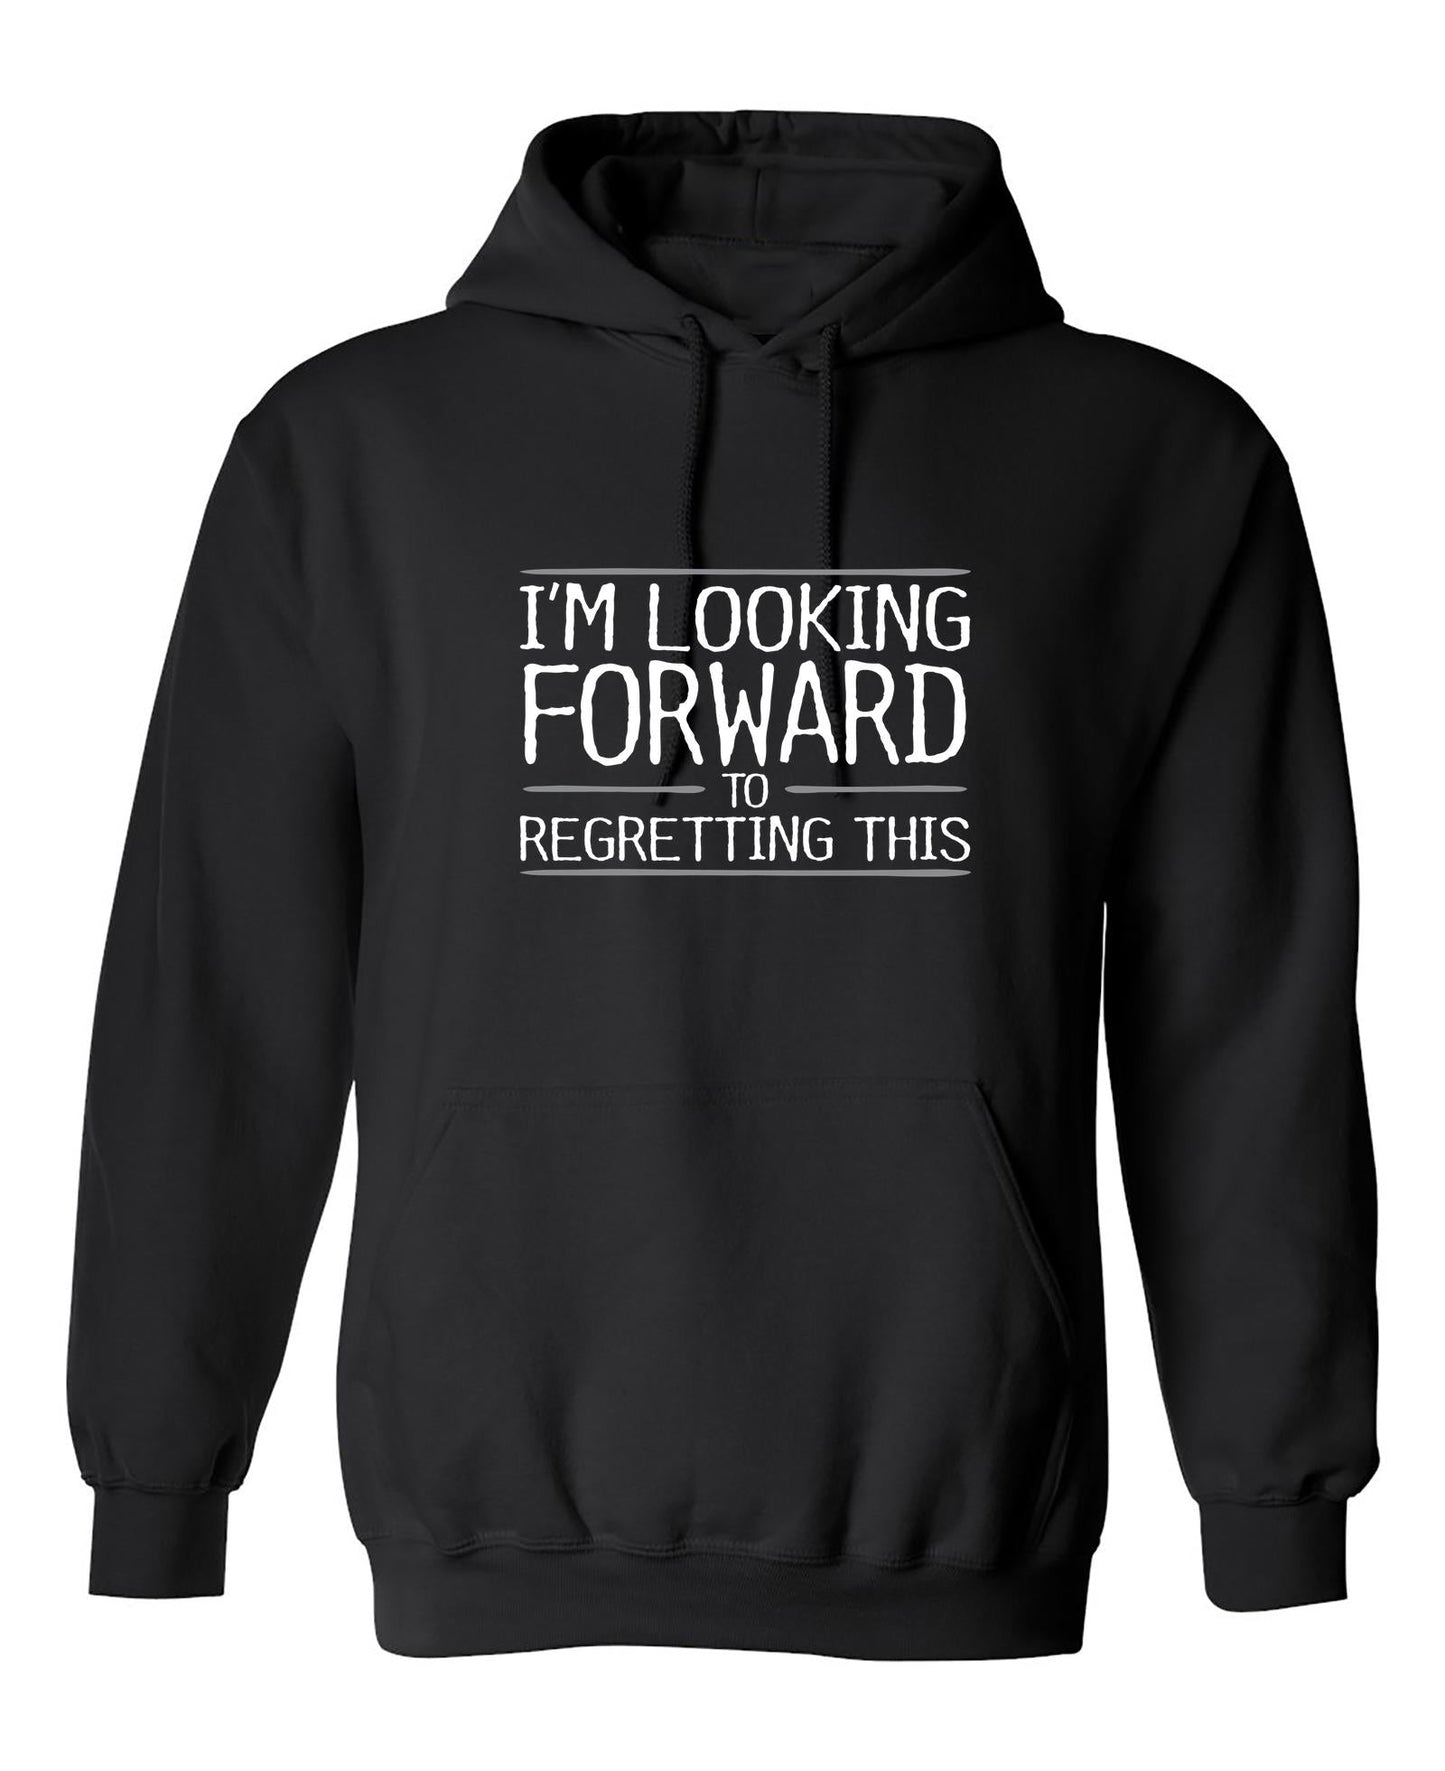 Funny T-Shirts design "I'm Looking Forward To Regretting This"